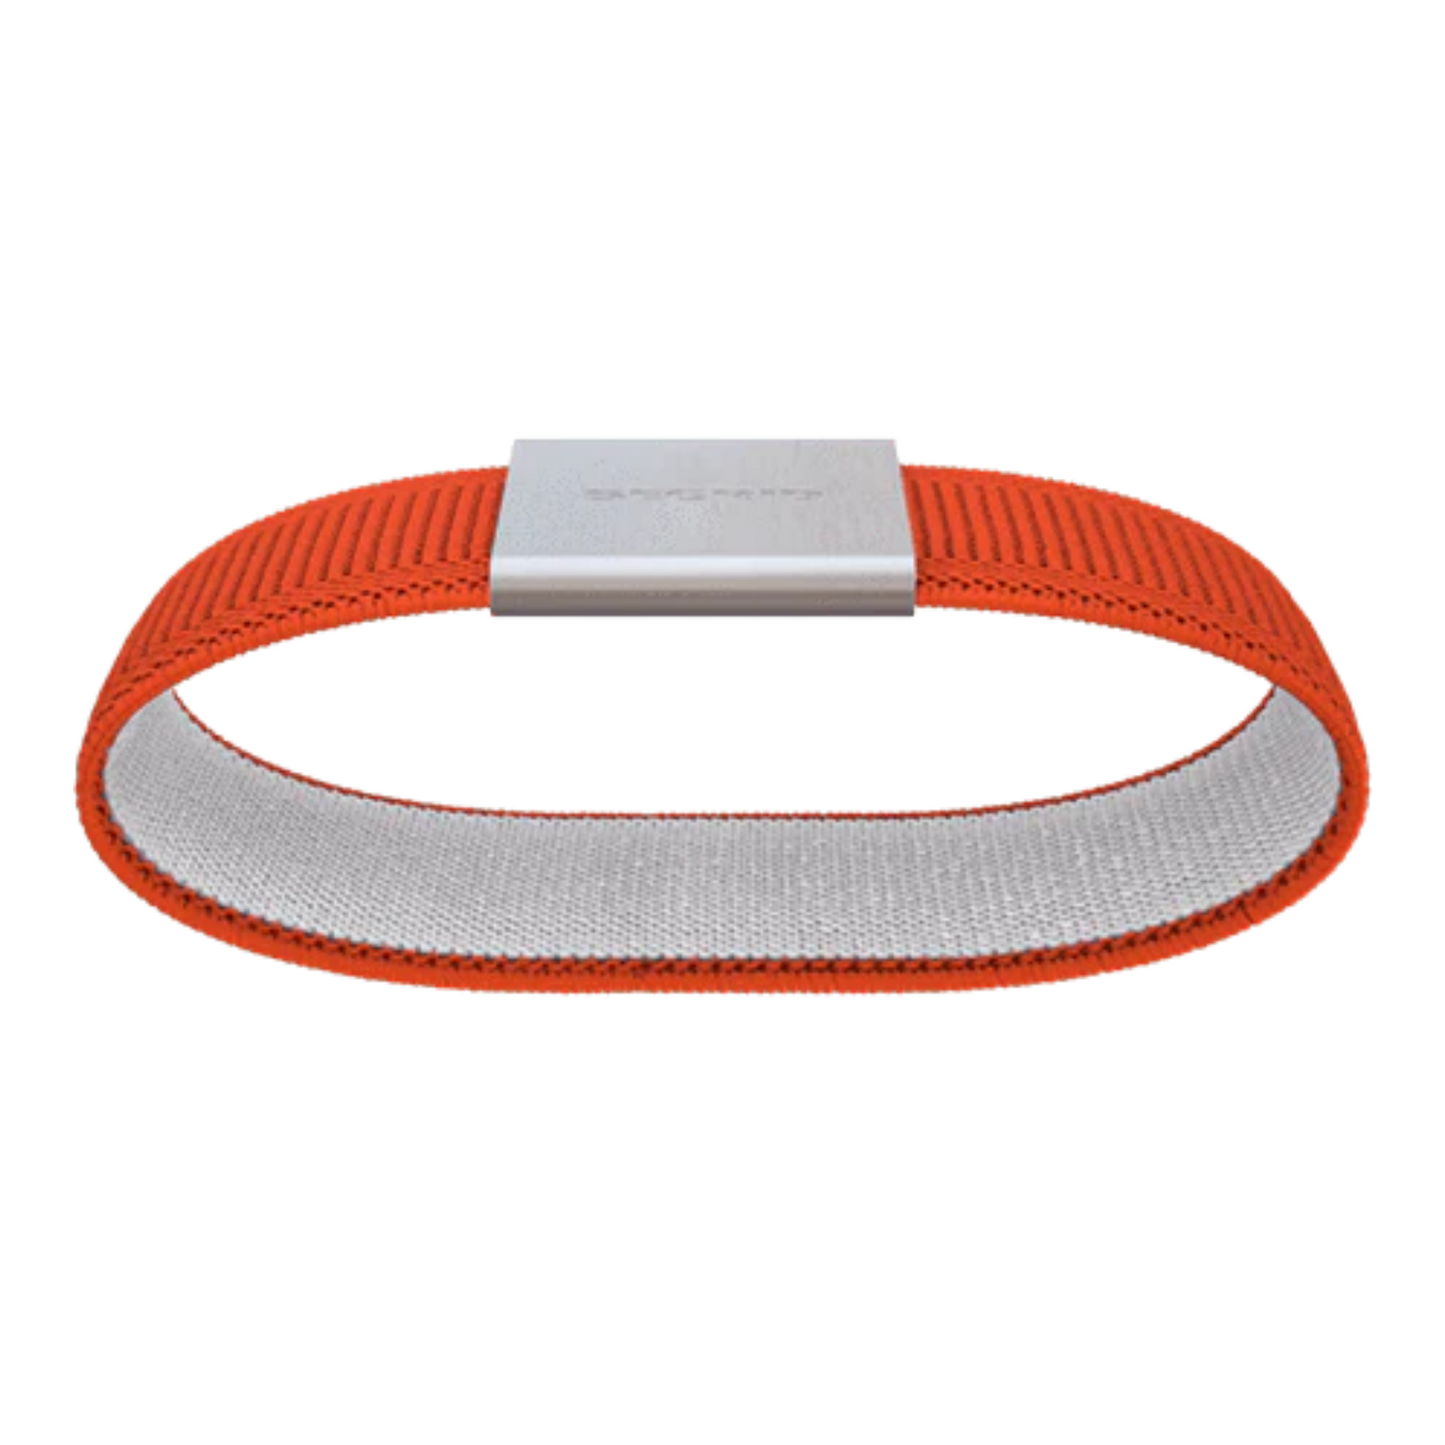 The solid orange elastic is pictured from below revealing the light grey lining. The silver metal buckle sits on the top of the loop.